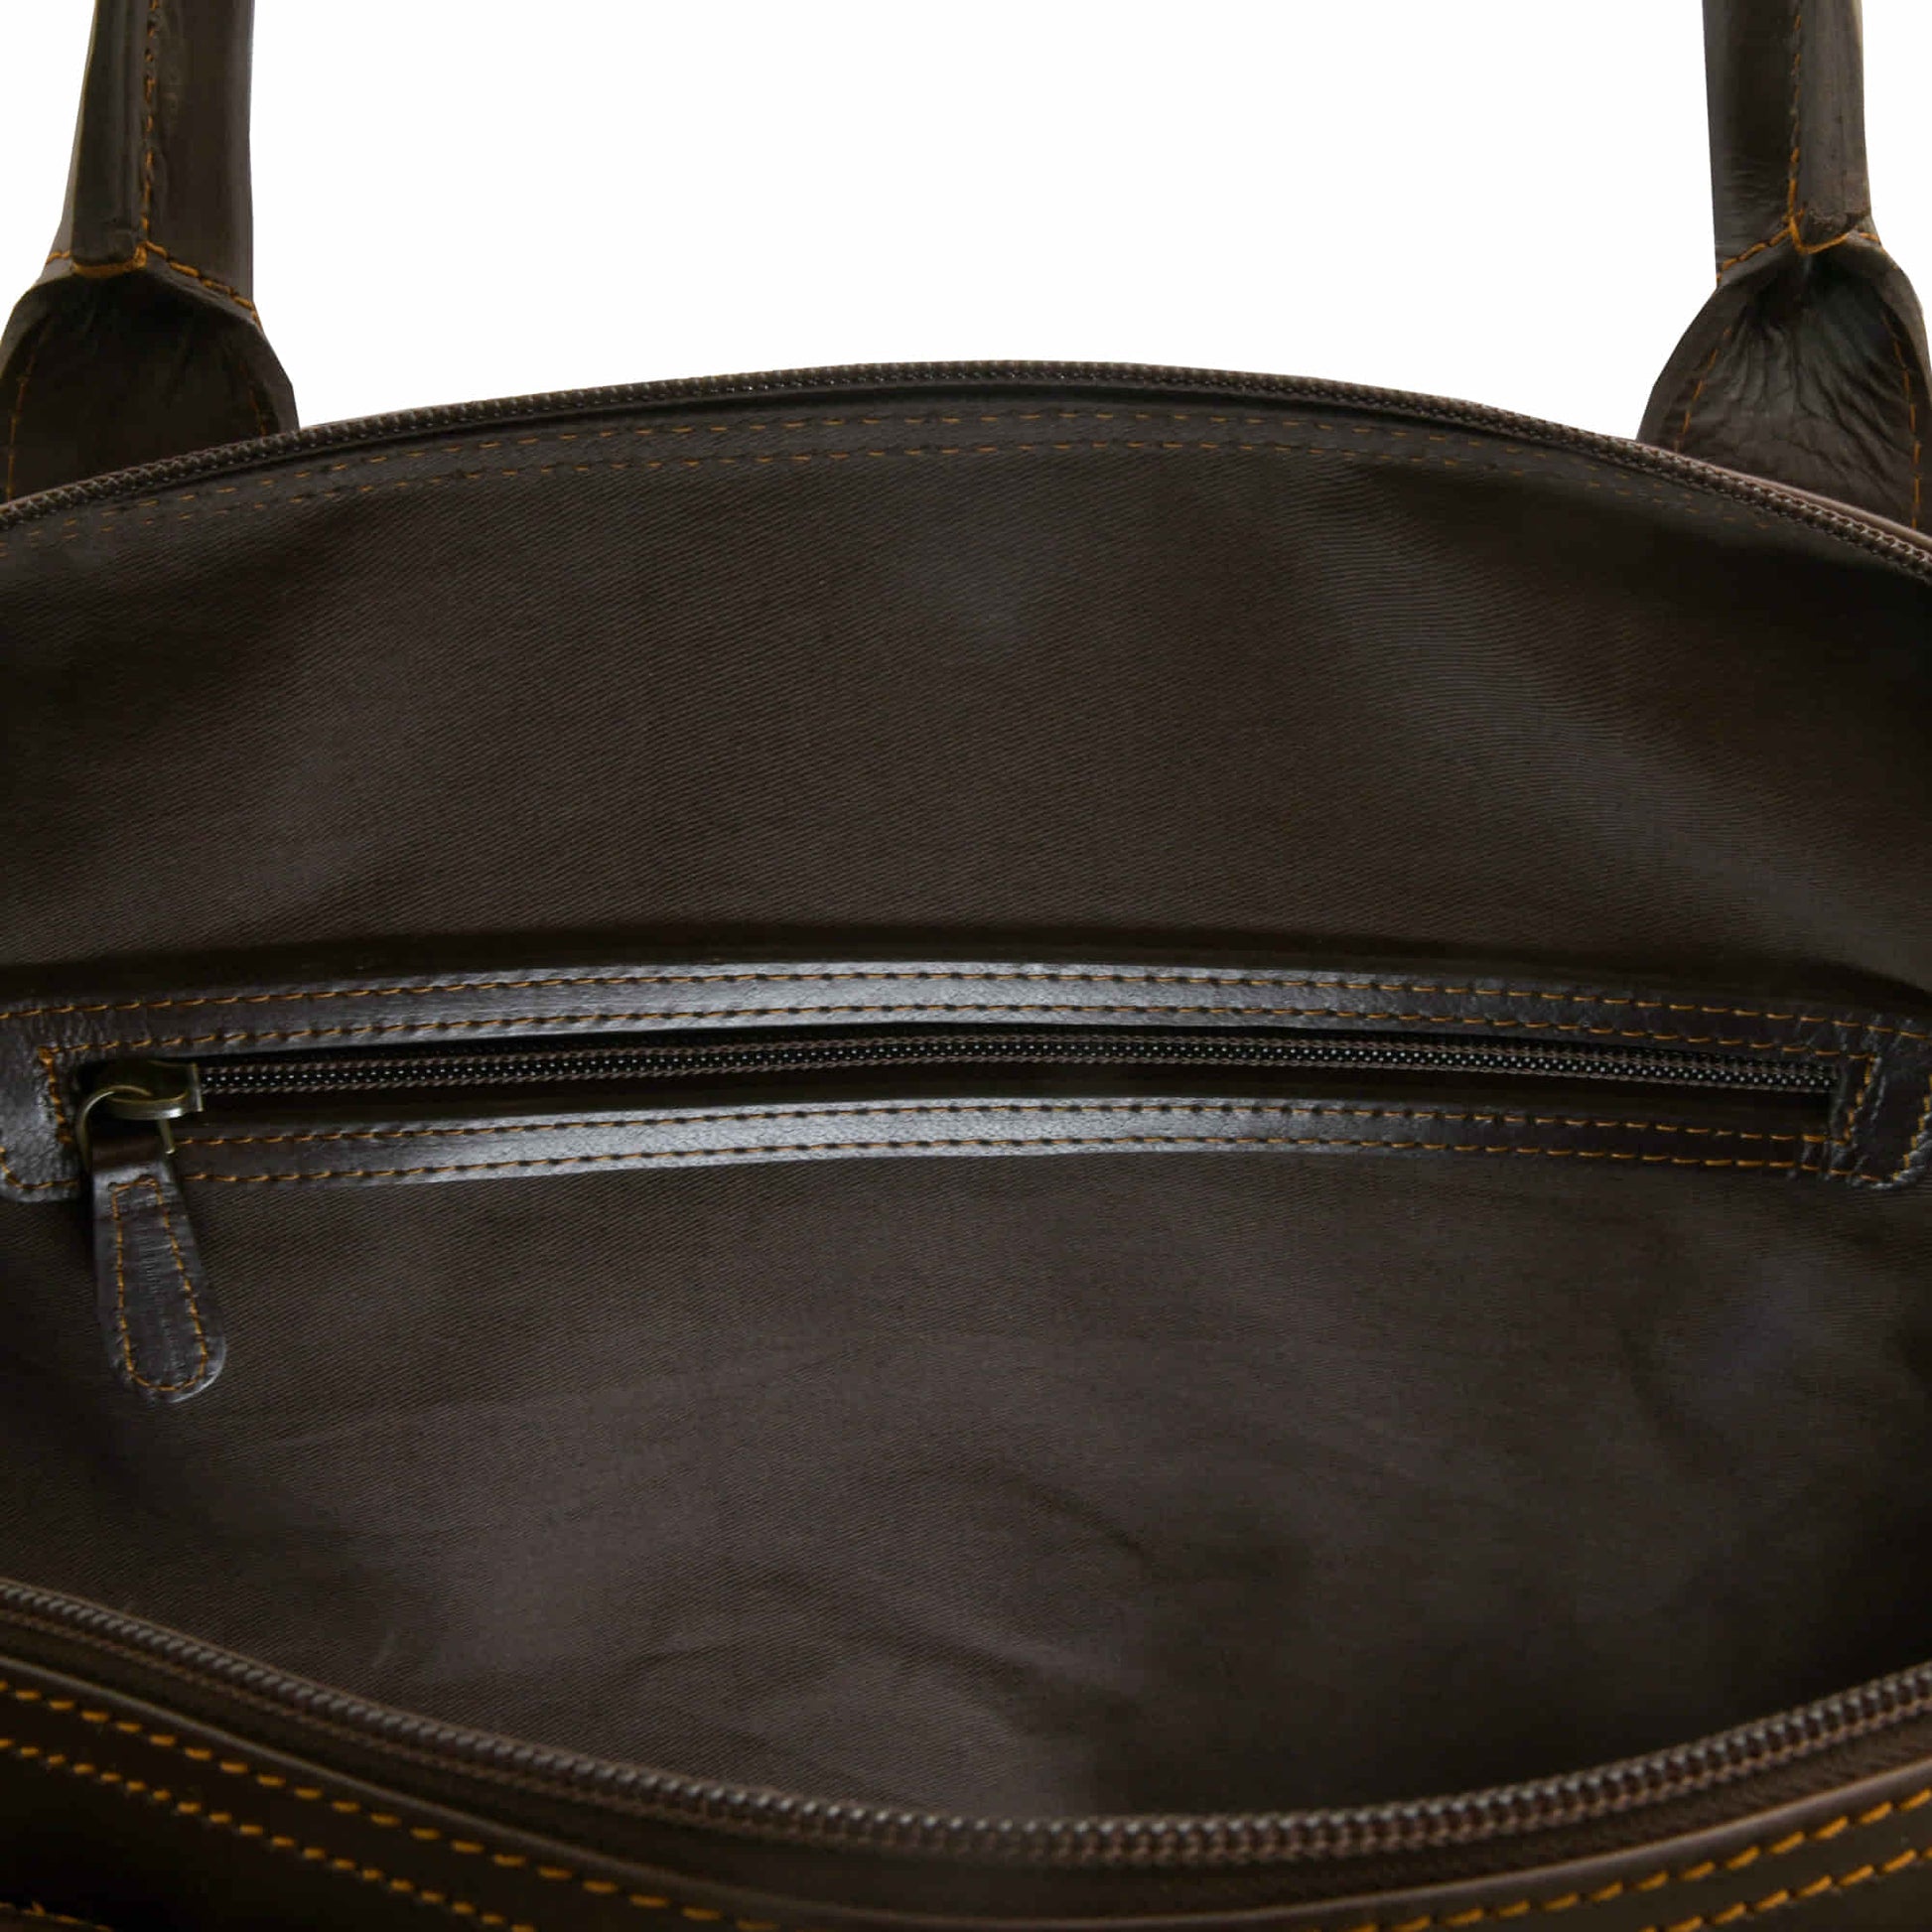 Style n Craft 392100 Large Duffle Bag in Full Grain Dark Brown Leather - Interior View Showing the Interior Zipper Pocket